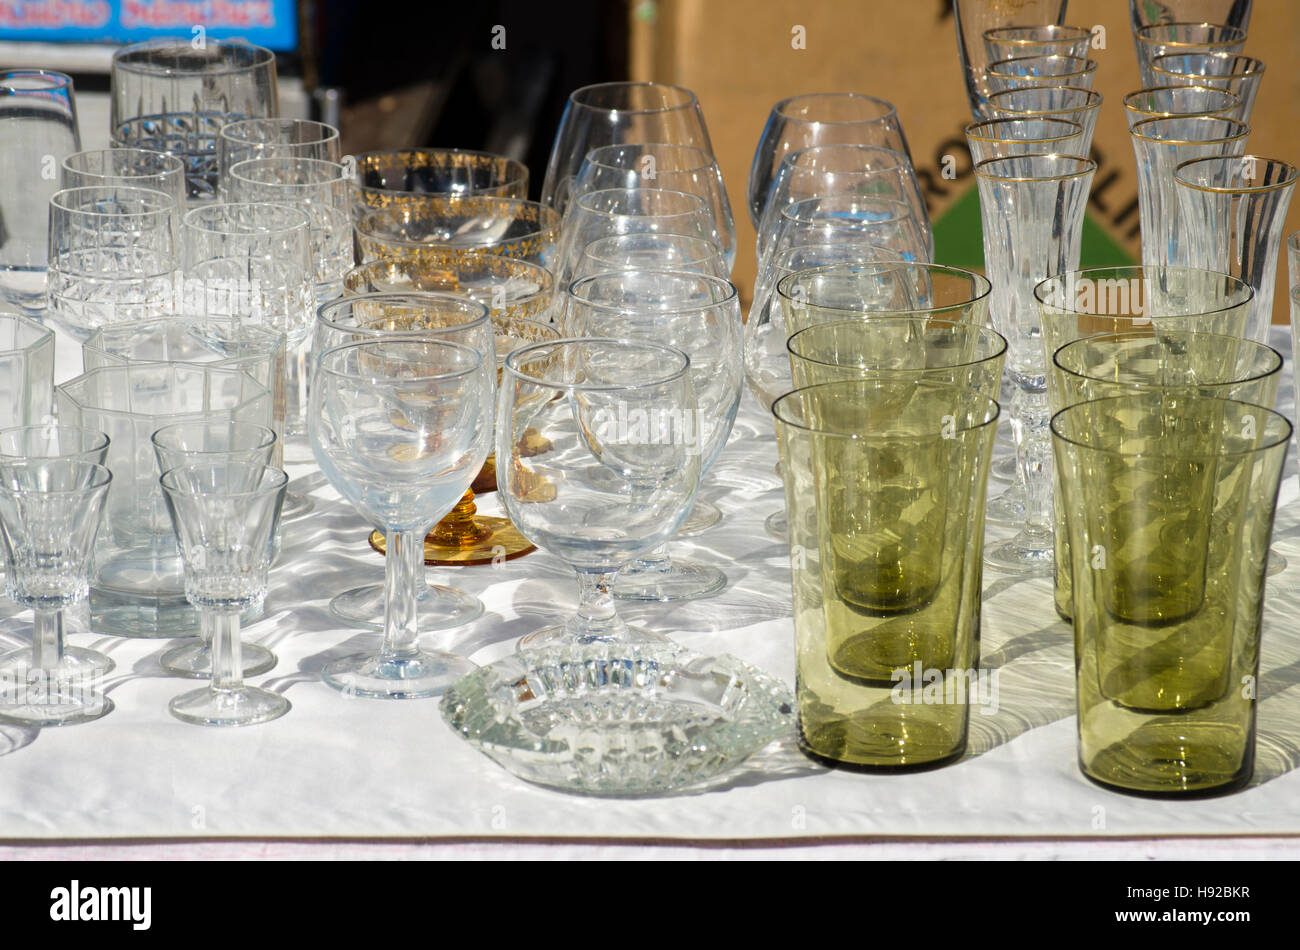 Different glassware on display at second hand market, Spain Stock Photo